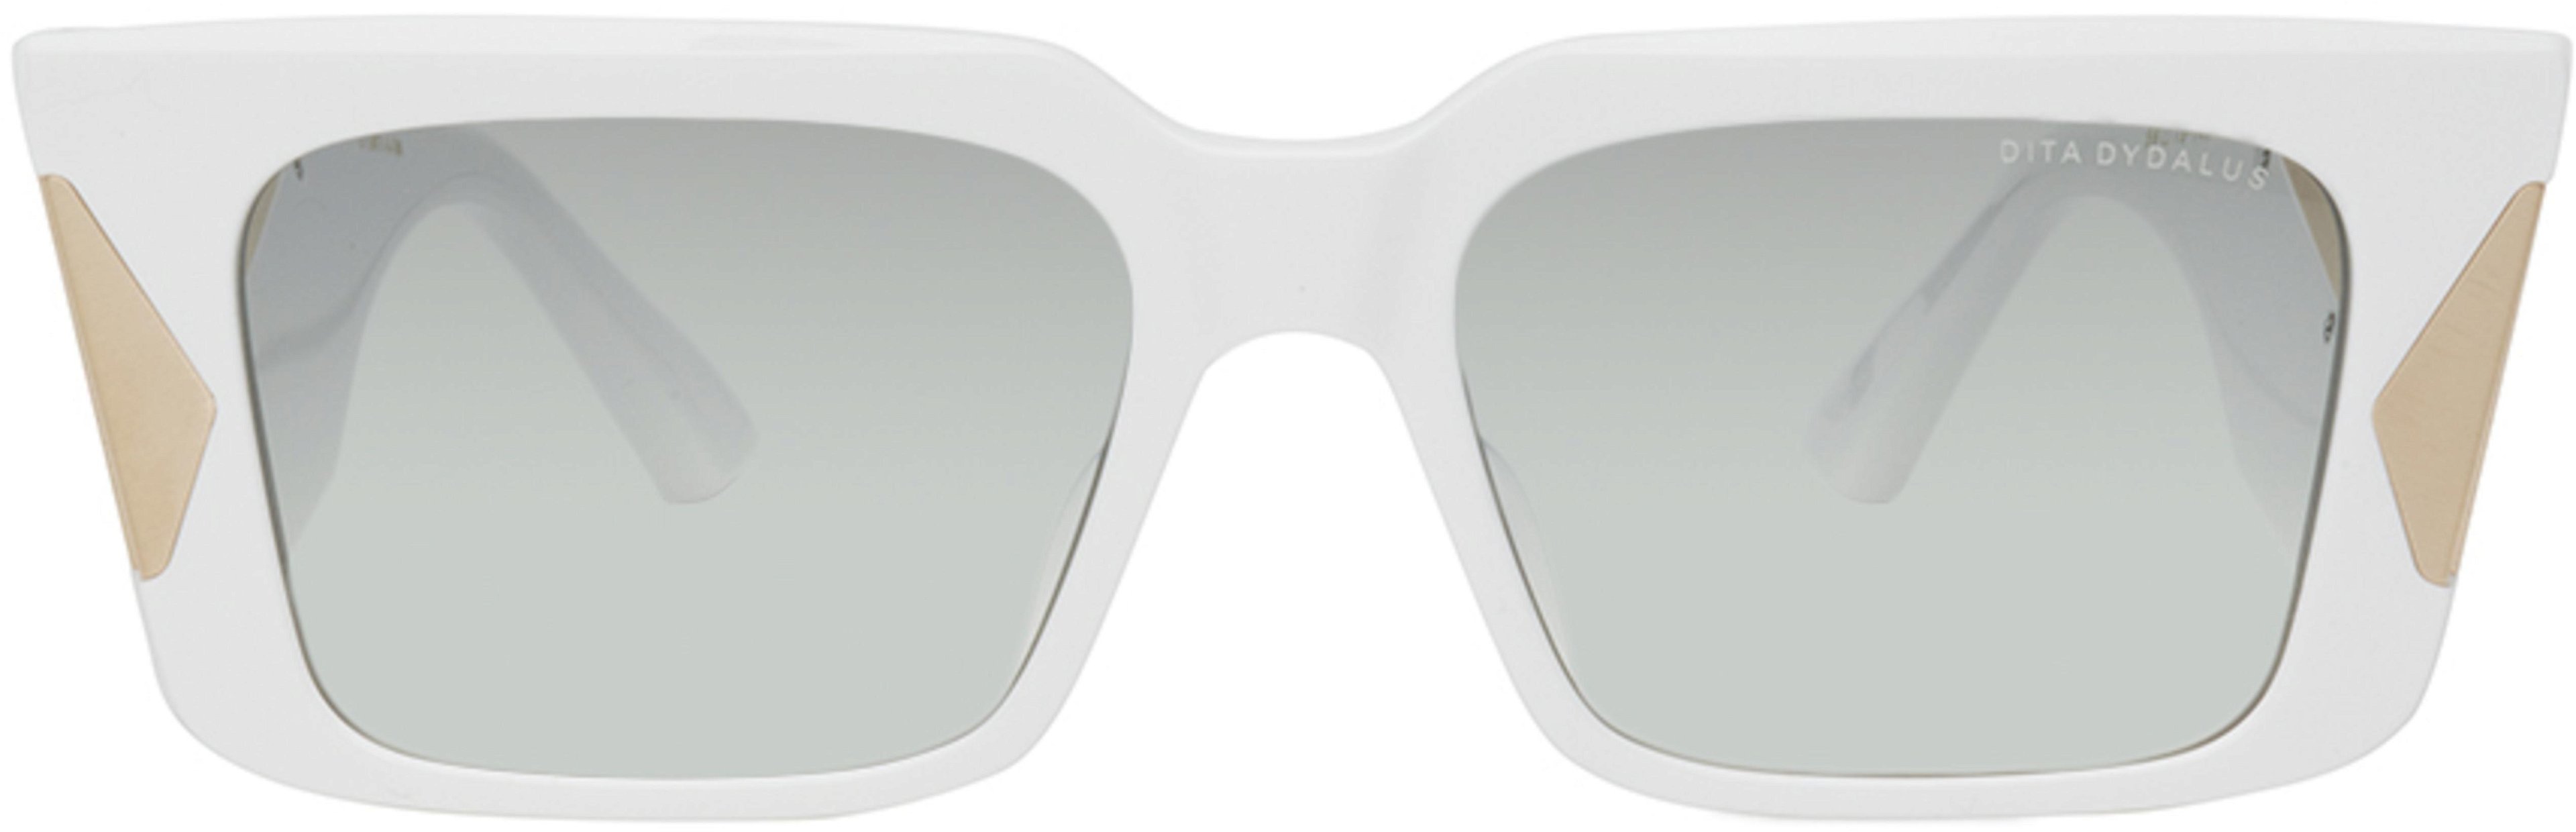 White Limited Edition Dydalus Sunglasses by DITA